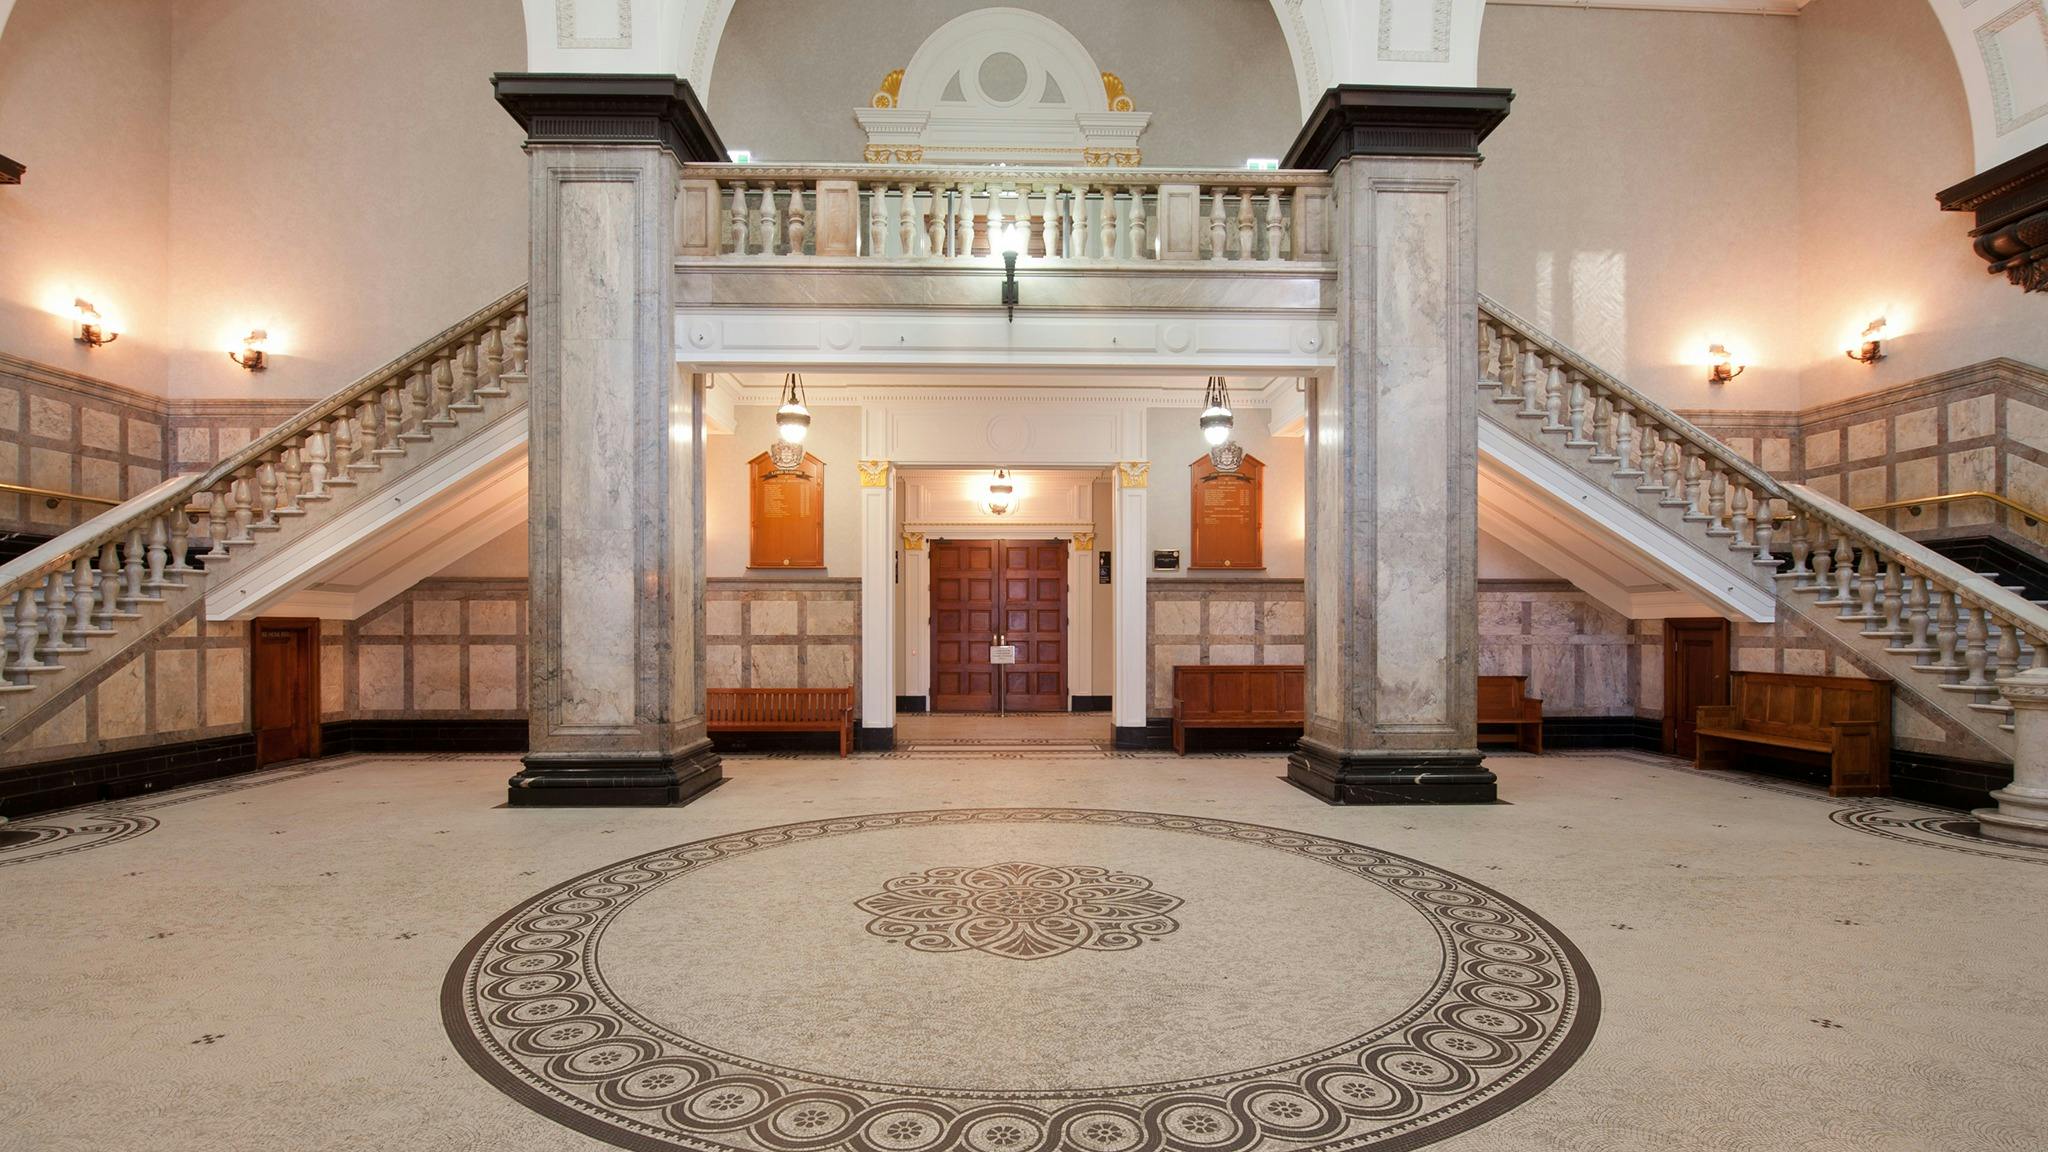 Brisbane City Hall foyer with marble staircase